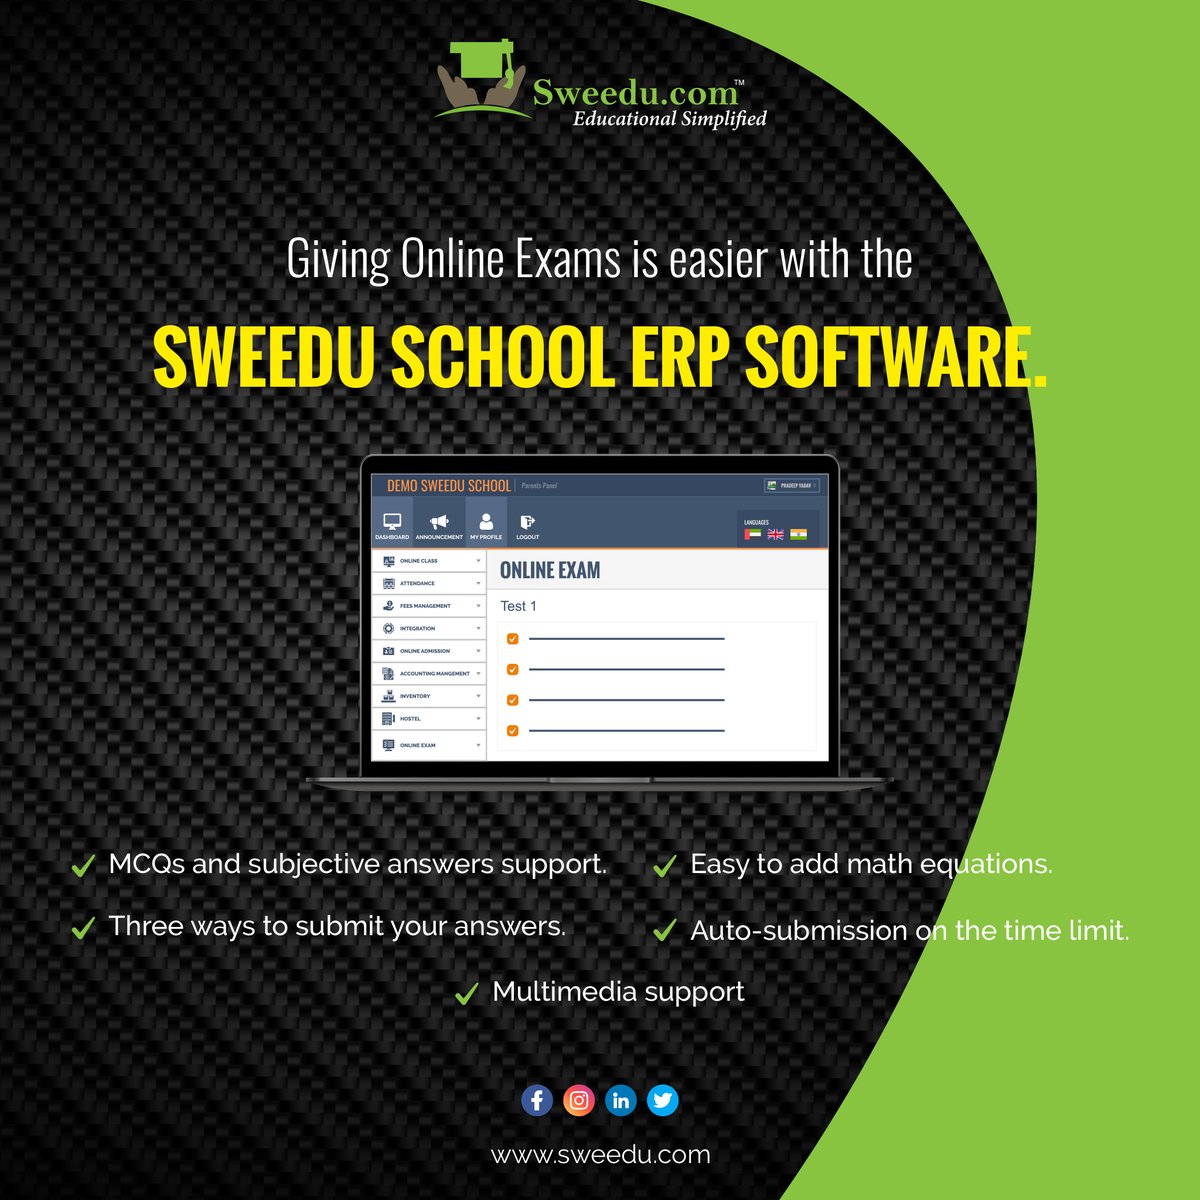 Conduct #onlineexams of students with the ease of SWEEDU School Management Software.
Automate exam assessment and give out reports faster.
Connect with us to find out more.
.
.
#sweedu #schoolmanagementsoftware #onlinelearning #schoolexamination